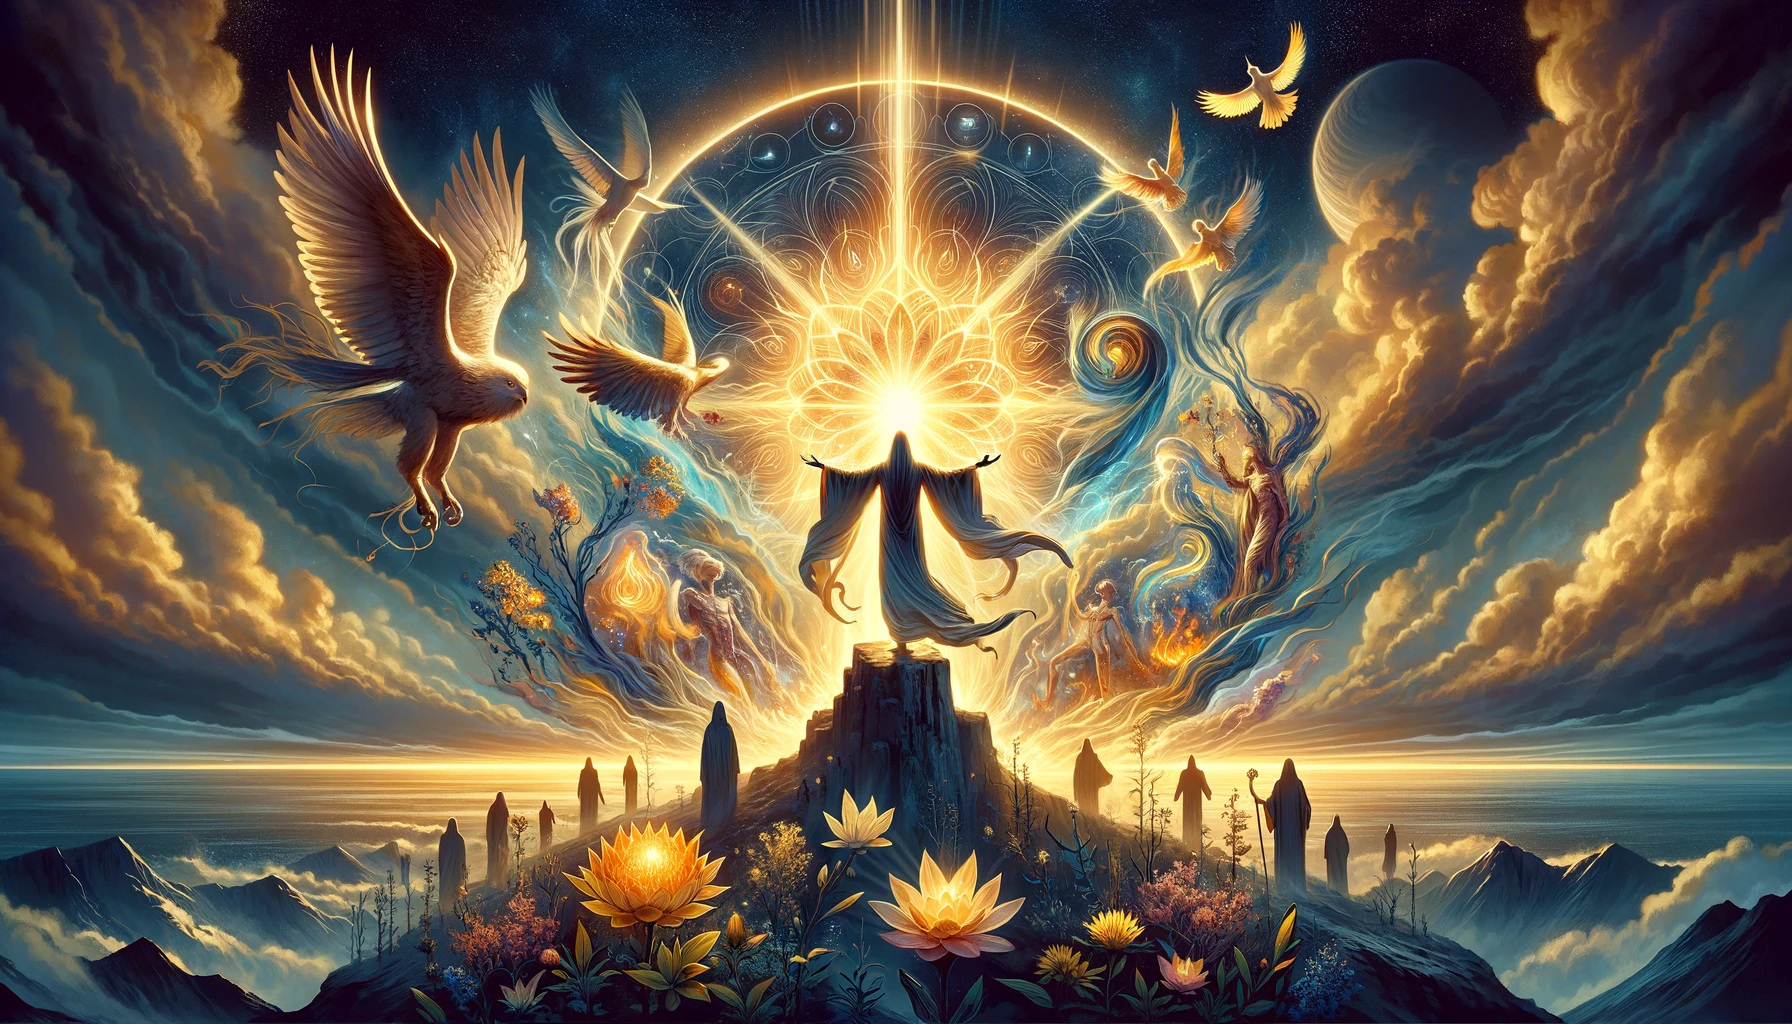 "A powerful visualization depicting the figure of Judgment as a guiding force, surrounded by symbols of transformation and new beginnings. The scene unfolds against a backdrop of a dramatic dawn sky, symbolizing the dawning of awareness and the start of a new chapter in one's life. Through its imagery, viewers are invited to contemplate the transformative journey of self-realization and the potential for growth and renewal inherent in embracing change."